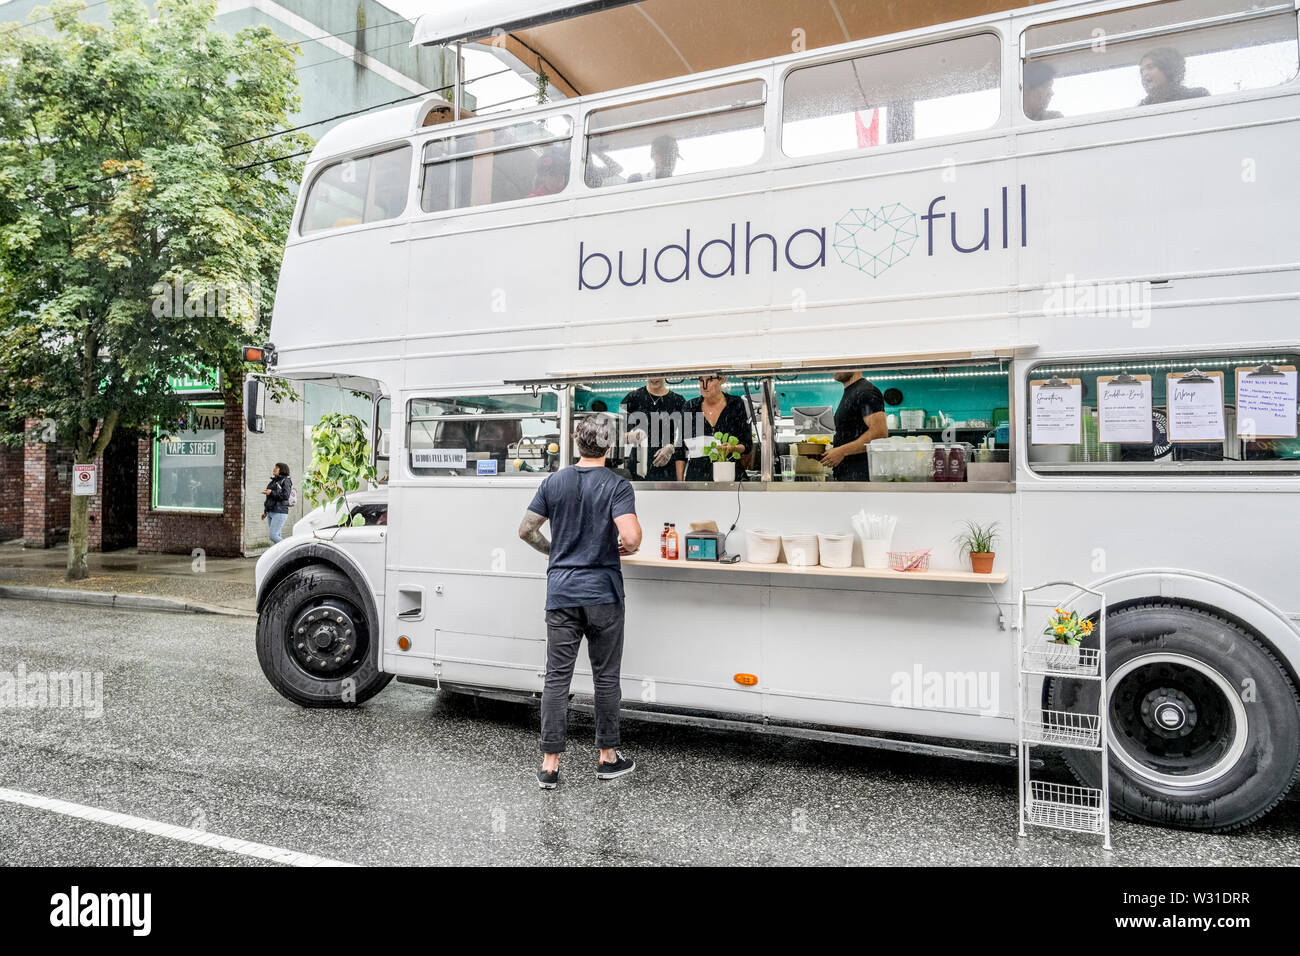 buddha full, double decker bus, food truck, Car Free Day, Commercial Drive, Vancouver, British Columbia, Canada Stock Photo